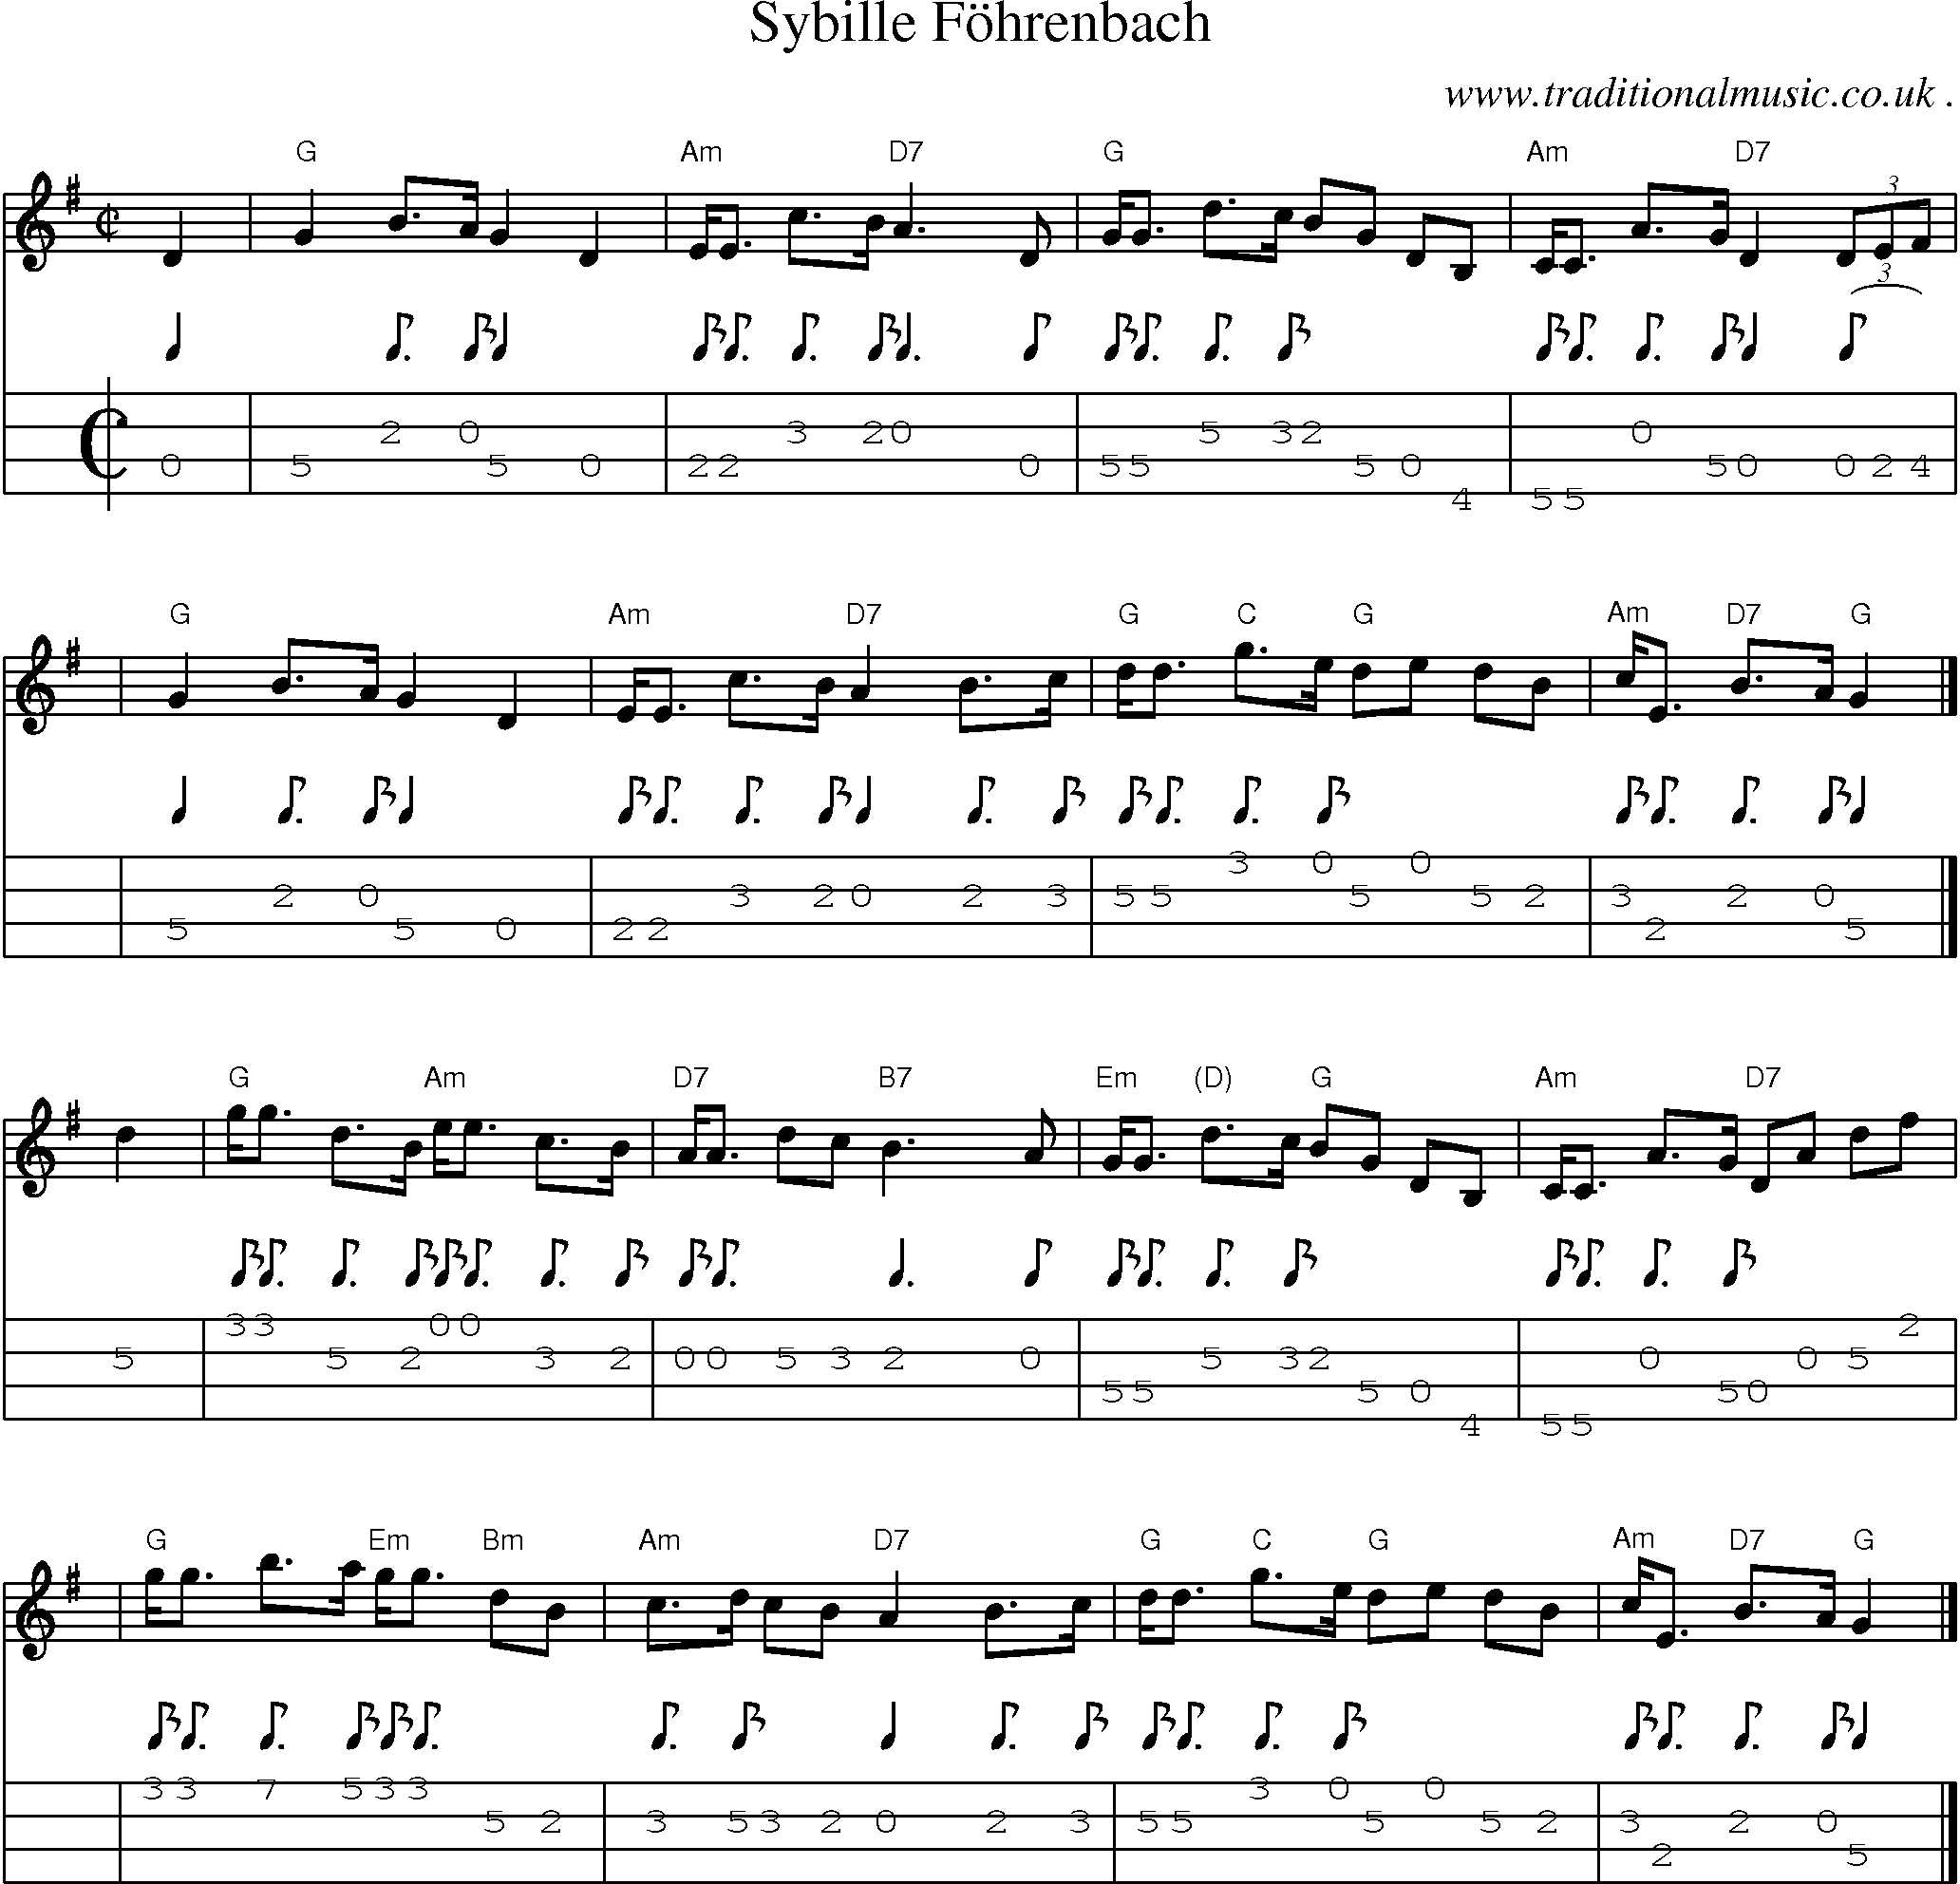 Sheet-music  score, Chords and Mandolin Tabs for Sybille Fohrenbach